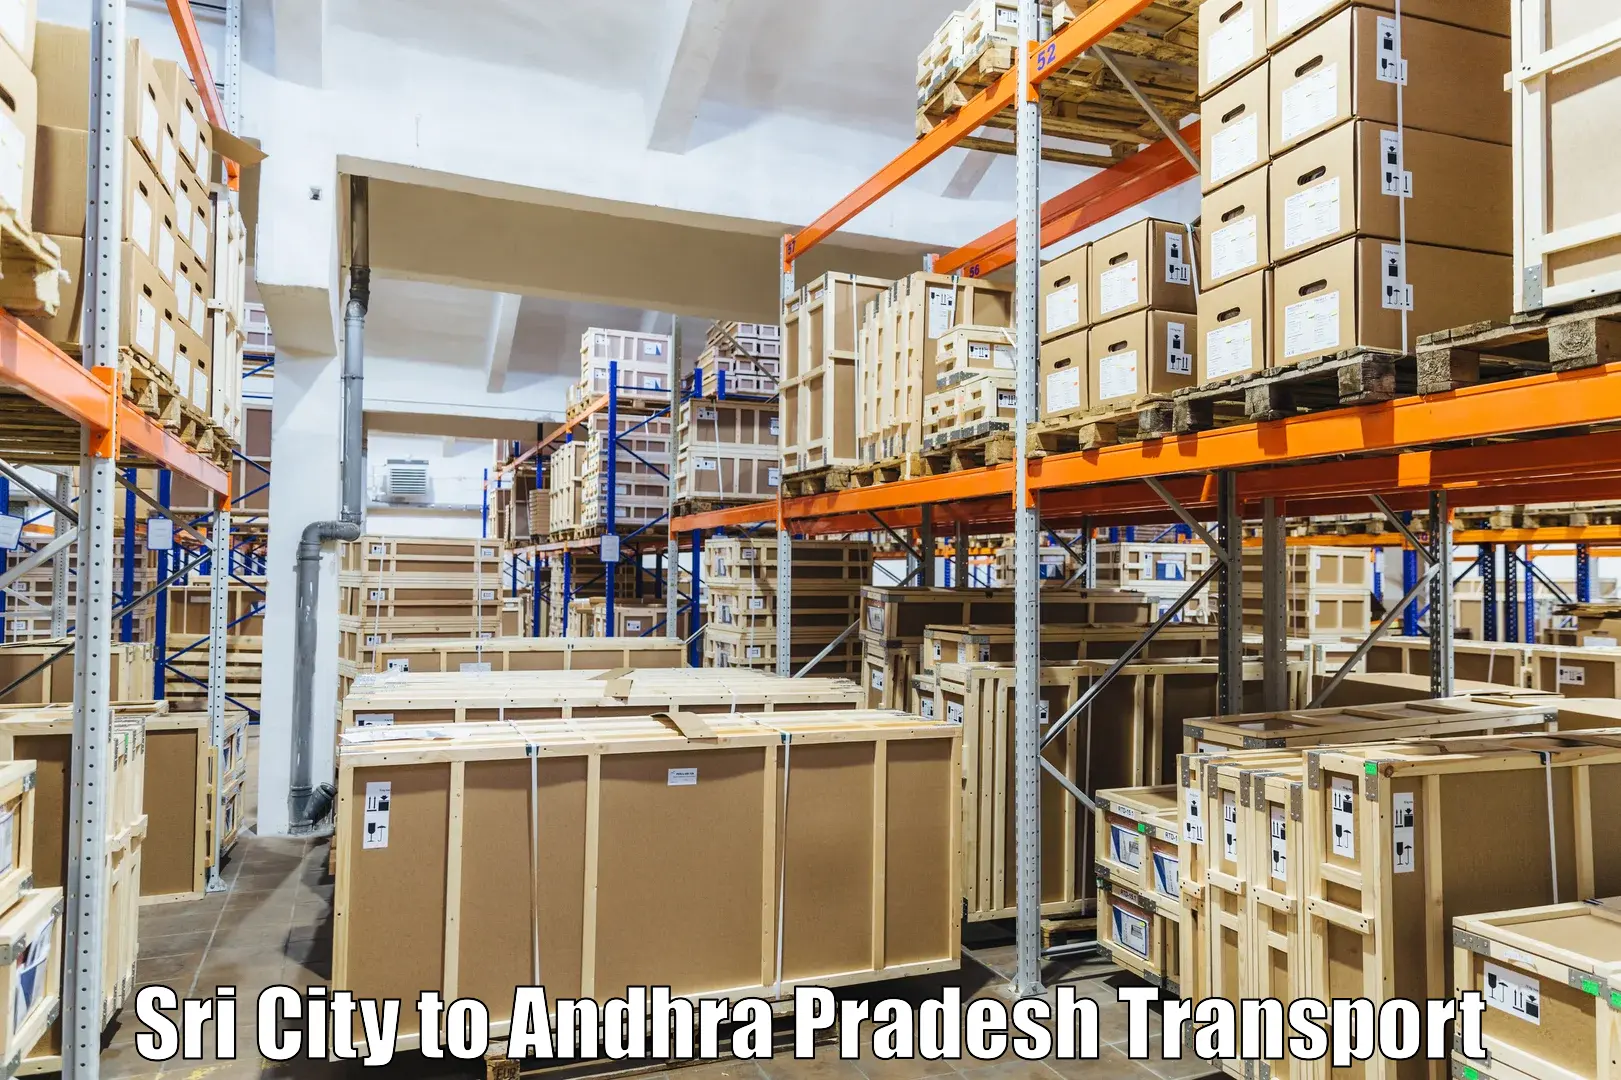 Shipping services in Sri City to Tekkali